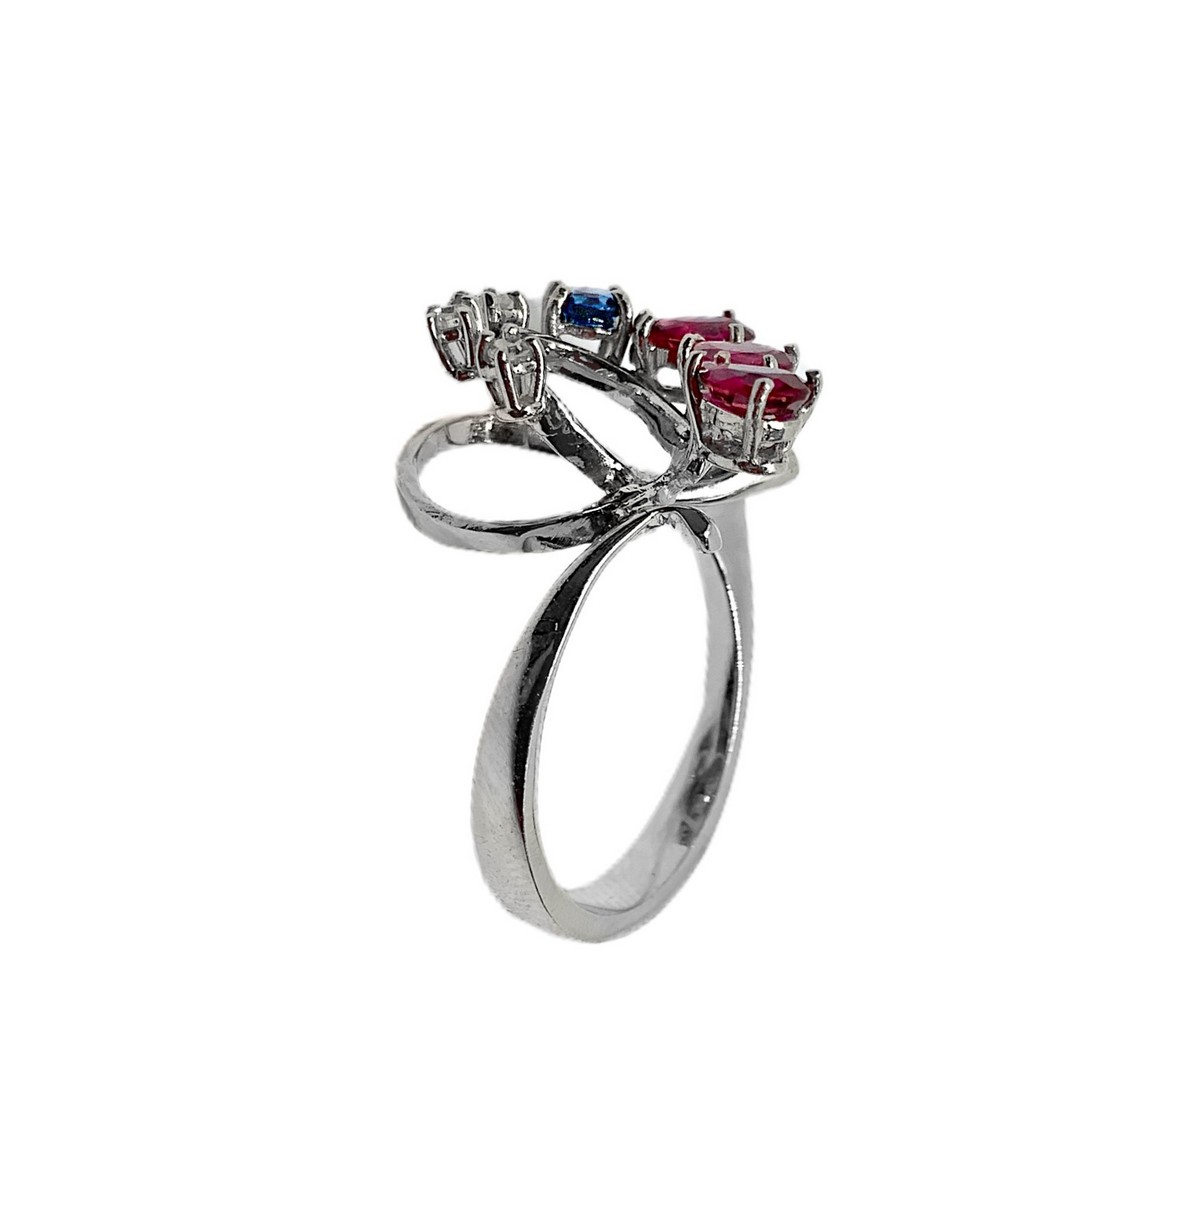 White gold ring with 3 rubies, 1 blue sapphire and 3 brilliants - Image 4 of 5